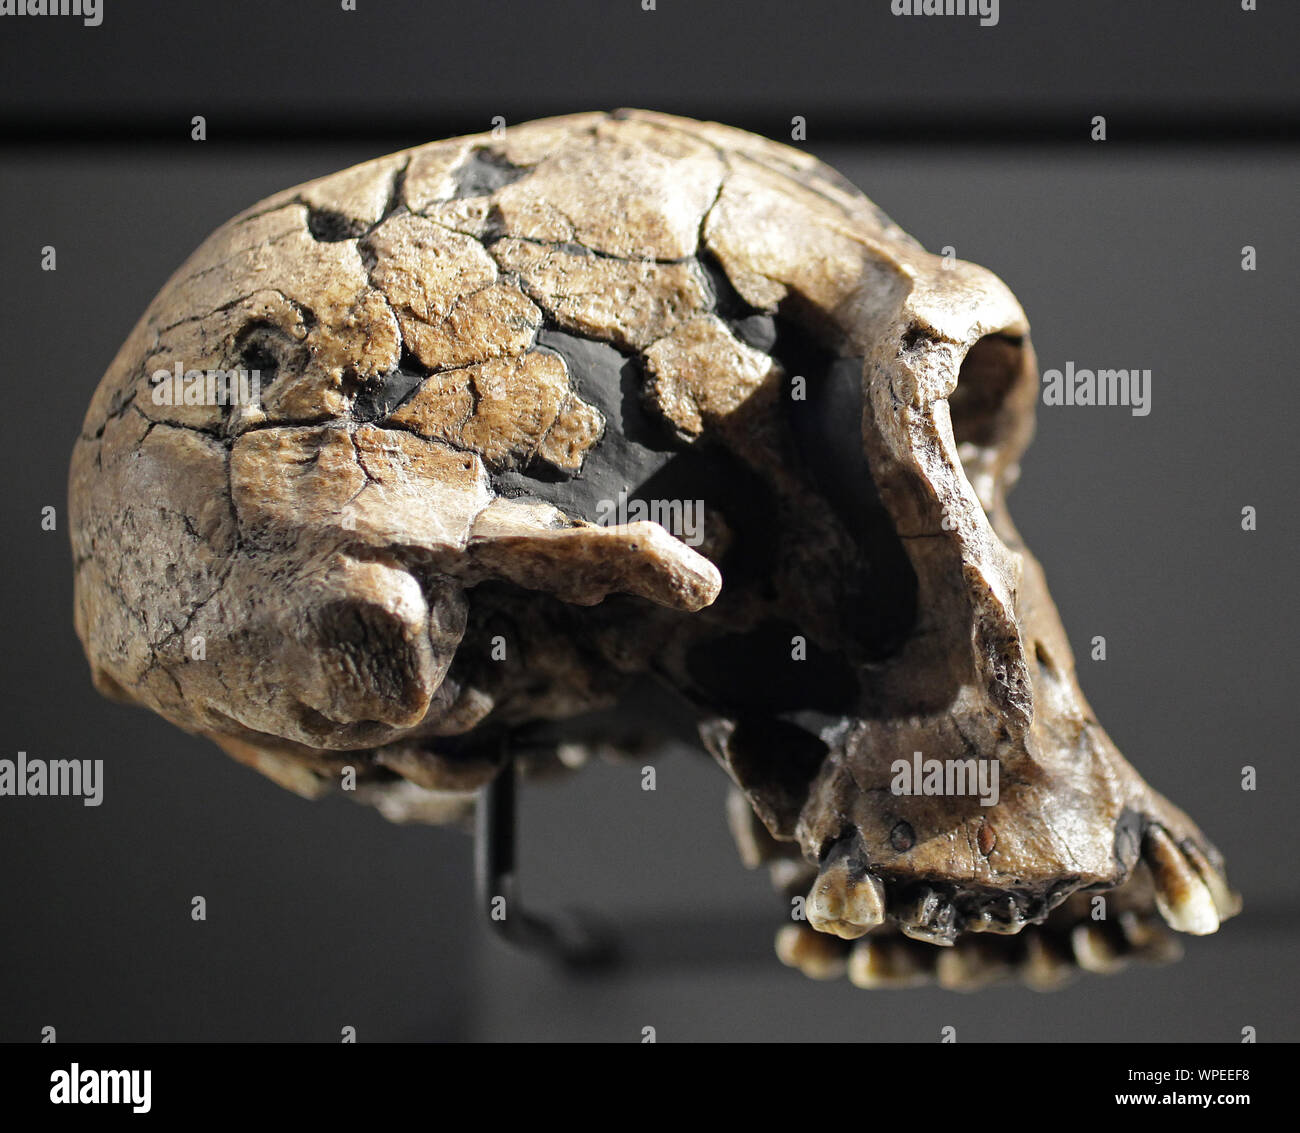 species Homo habilis Skull.Handy man.Archaic species of Homo.lived between 2.1 and 1.5 million years ago. Stock Photo